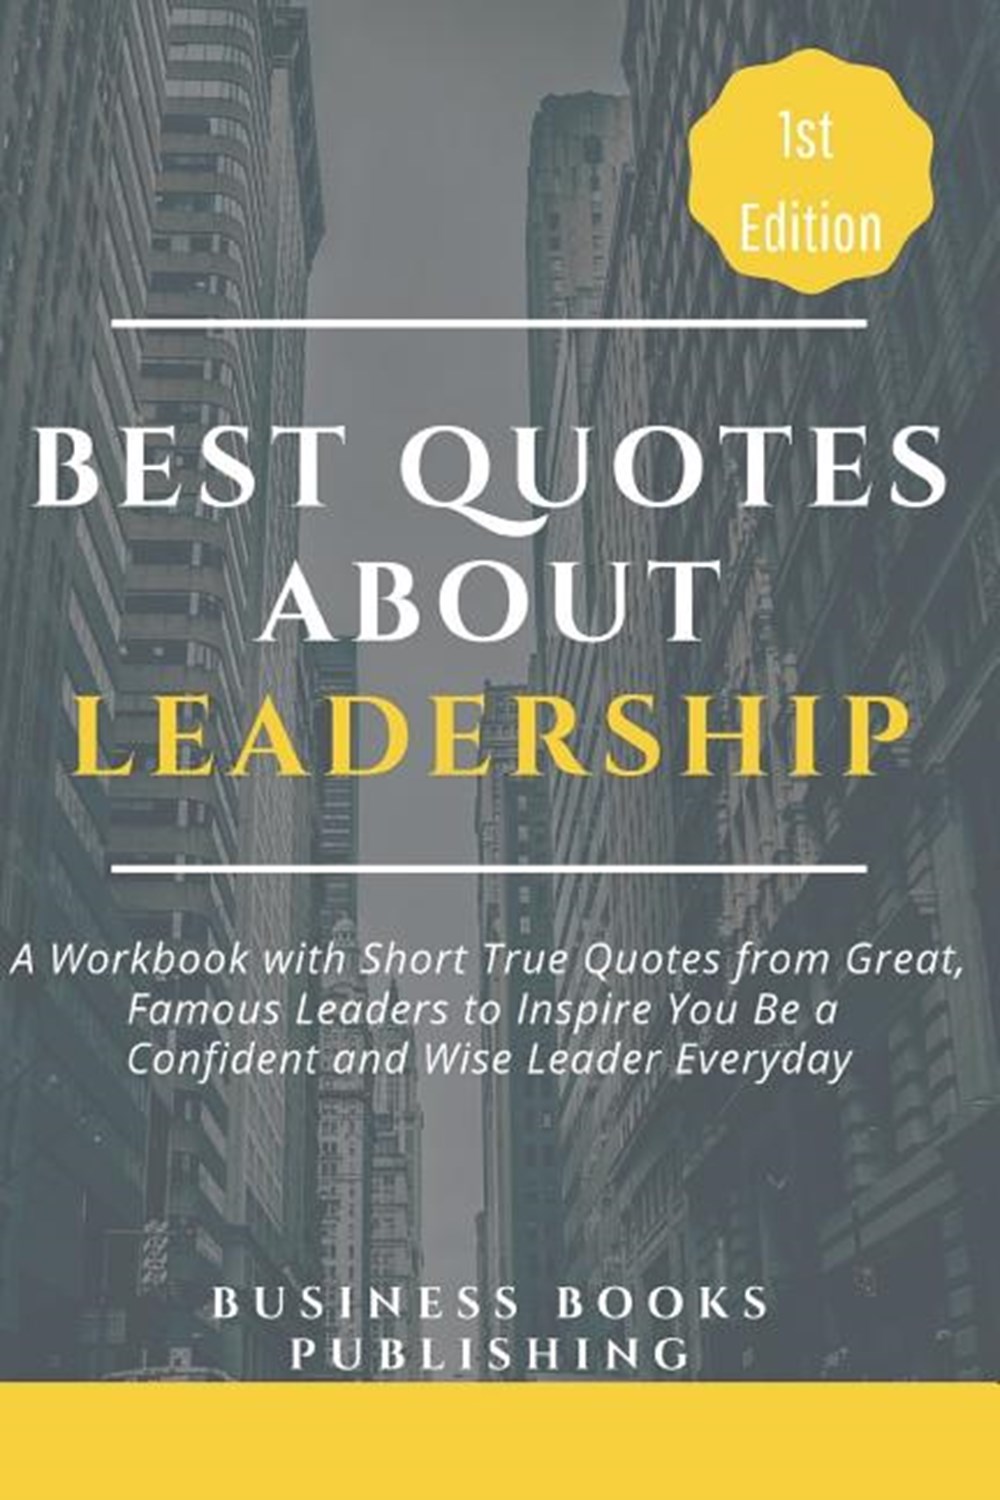 Best Quotes about Leadership: A Workbook with Short True Quotes from Great, Famous Leaders to Inspir